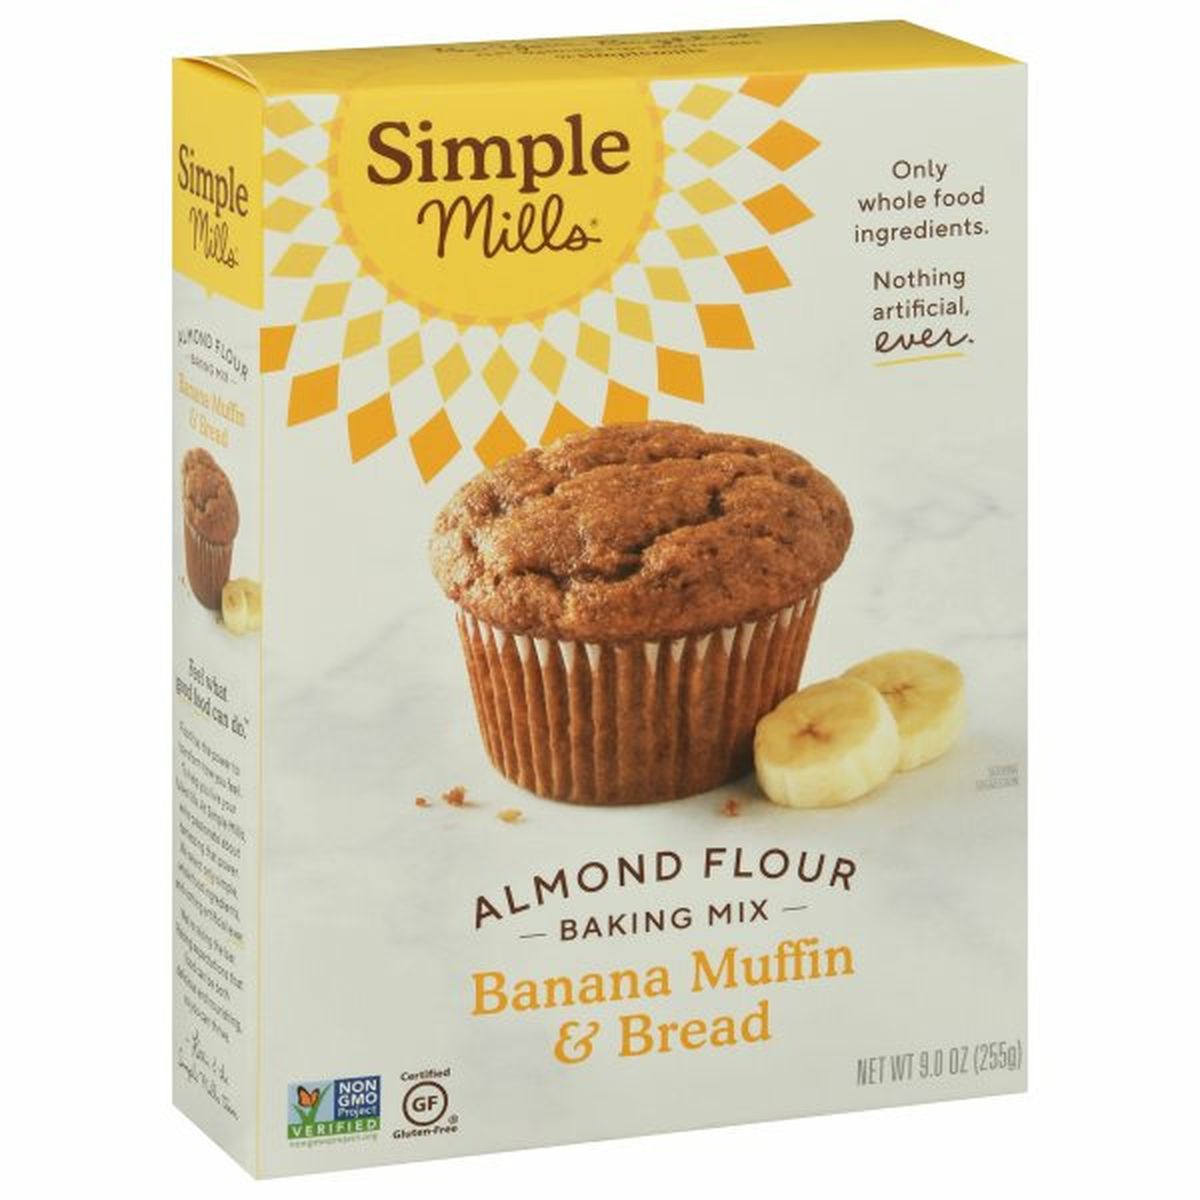 Calories in Simple Mills Baking Mix, Almond Flour, Banana Muffin & Bread